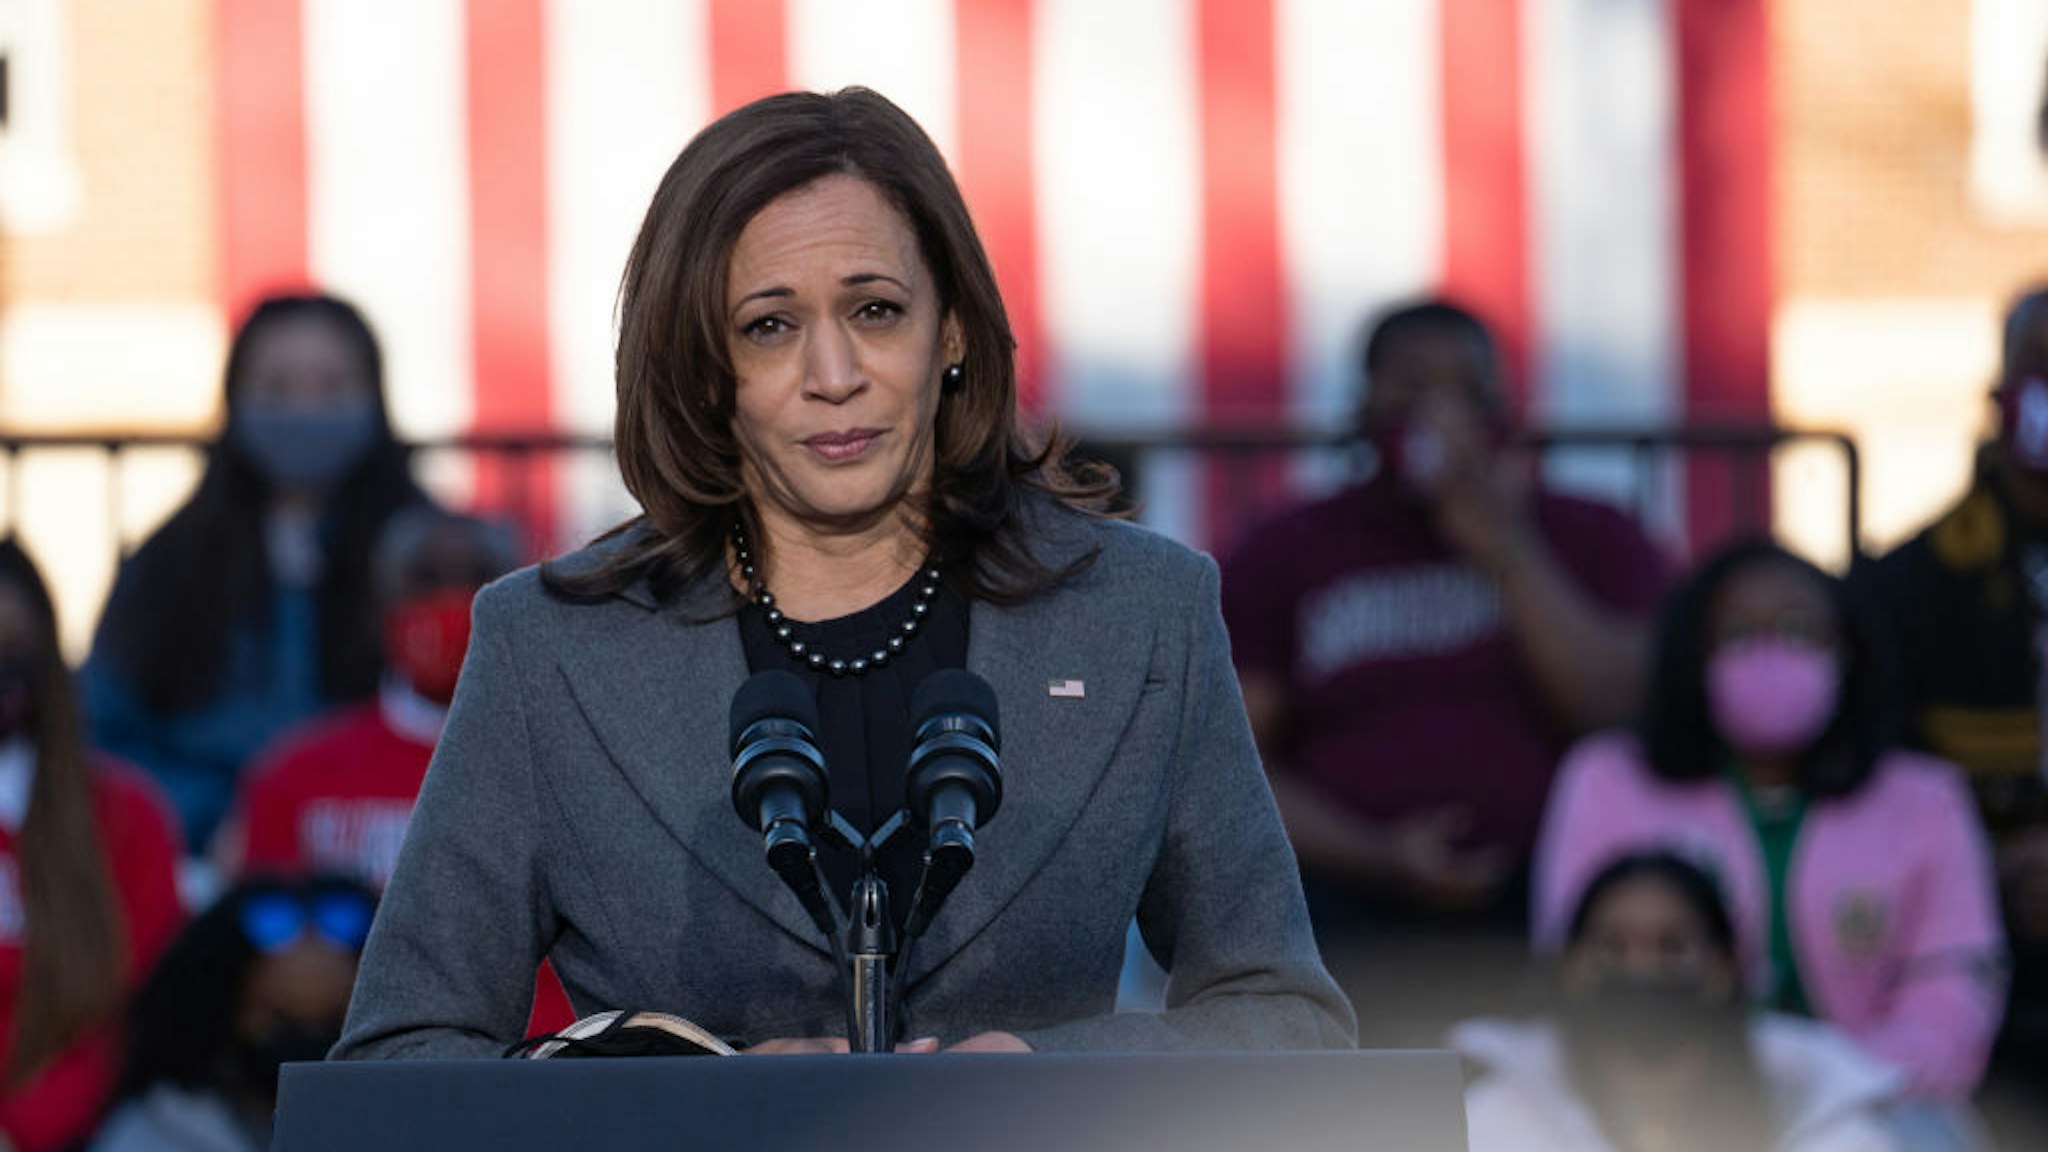 ATLANTA, GA - JANUARY 11: U.S. Vice President Kamala Harris speaks to a crowd at the Atlanta University Center Consortium, part of both Morehouse College and Clark Atlanta University on January 11, 2022 in Atlanta, Georgia. Harris and President Joe Biden delivered remarks on voting rights legislation. Georgia has been a focus point for voting legislation after the state voted Democratic for the first time in almost 30 years in the 2020 election. As a result, the Georgia House passed House Bill 531 to limit voting hours, drop boxes, and require a government ID when voting by mail. (Photo by Megan Varner/Getty Images)